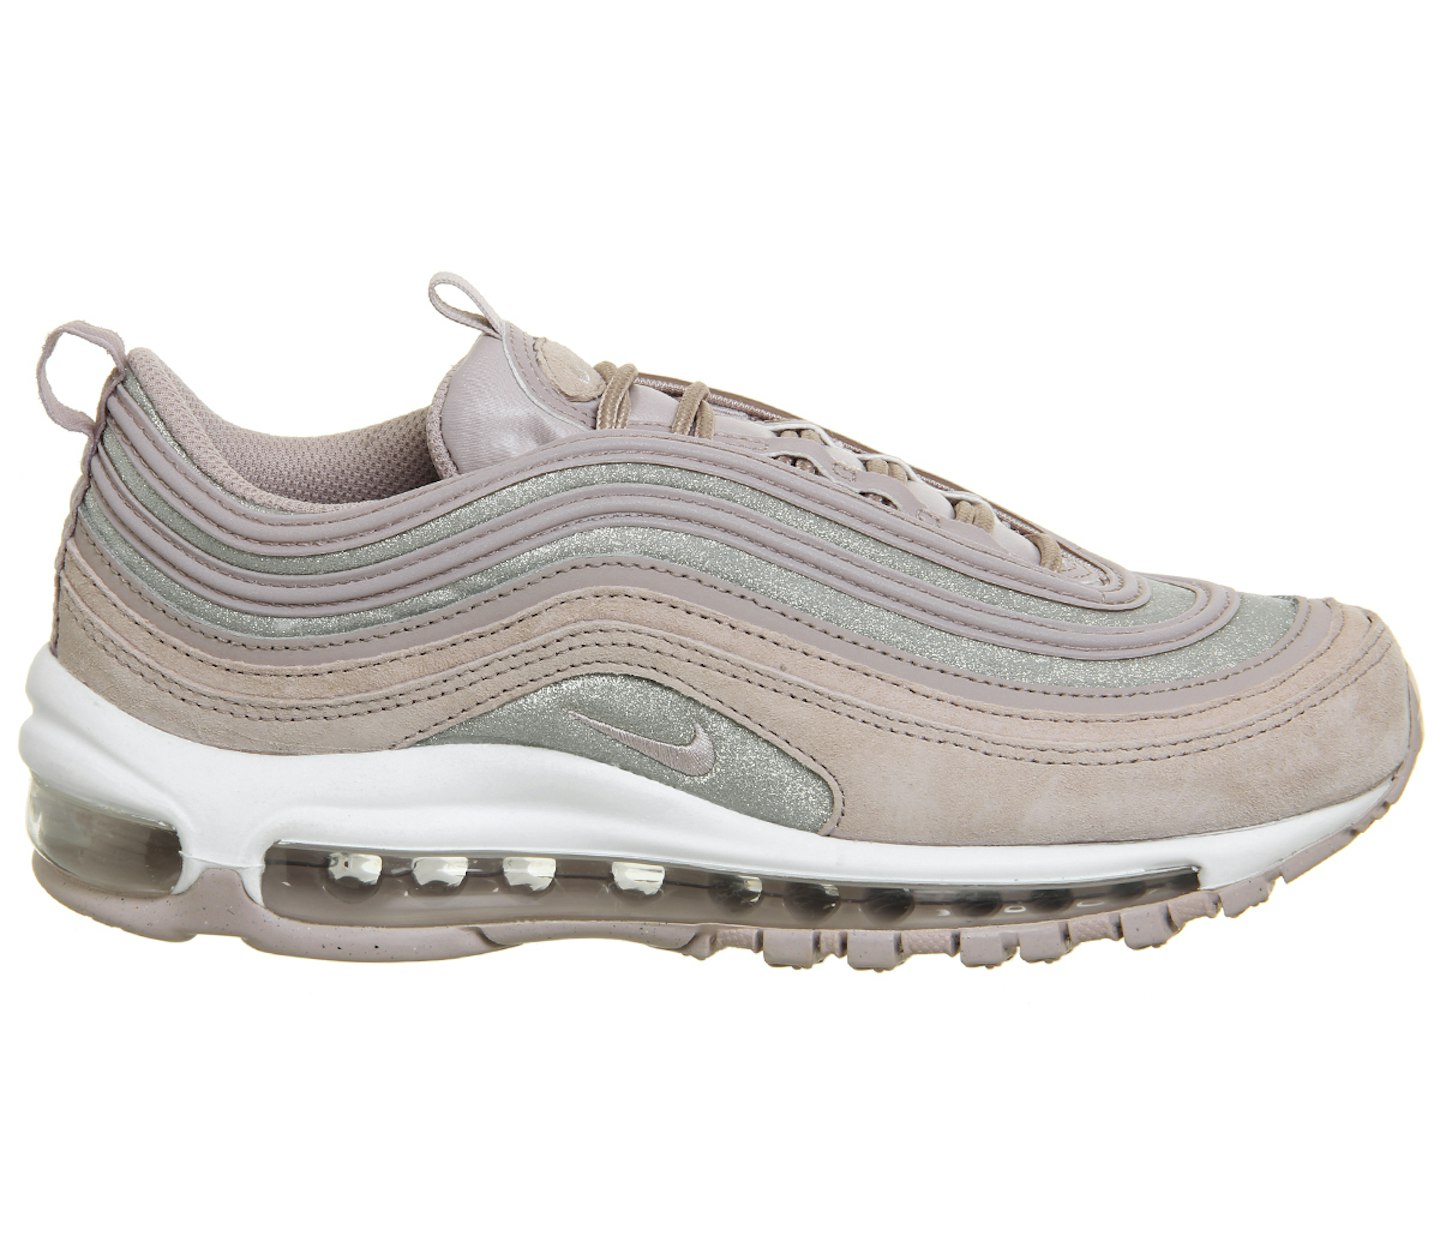 Nike, Air Max 97 Trainers, £145, Office